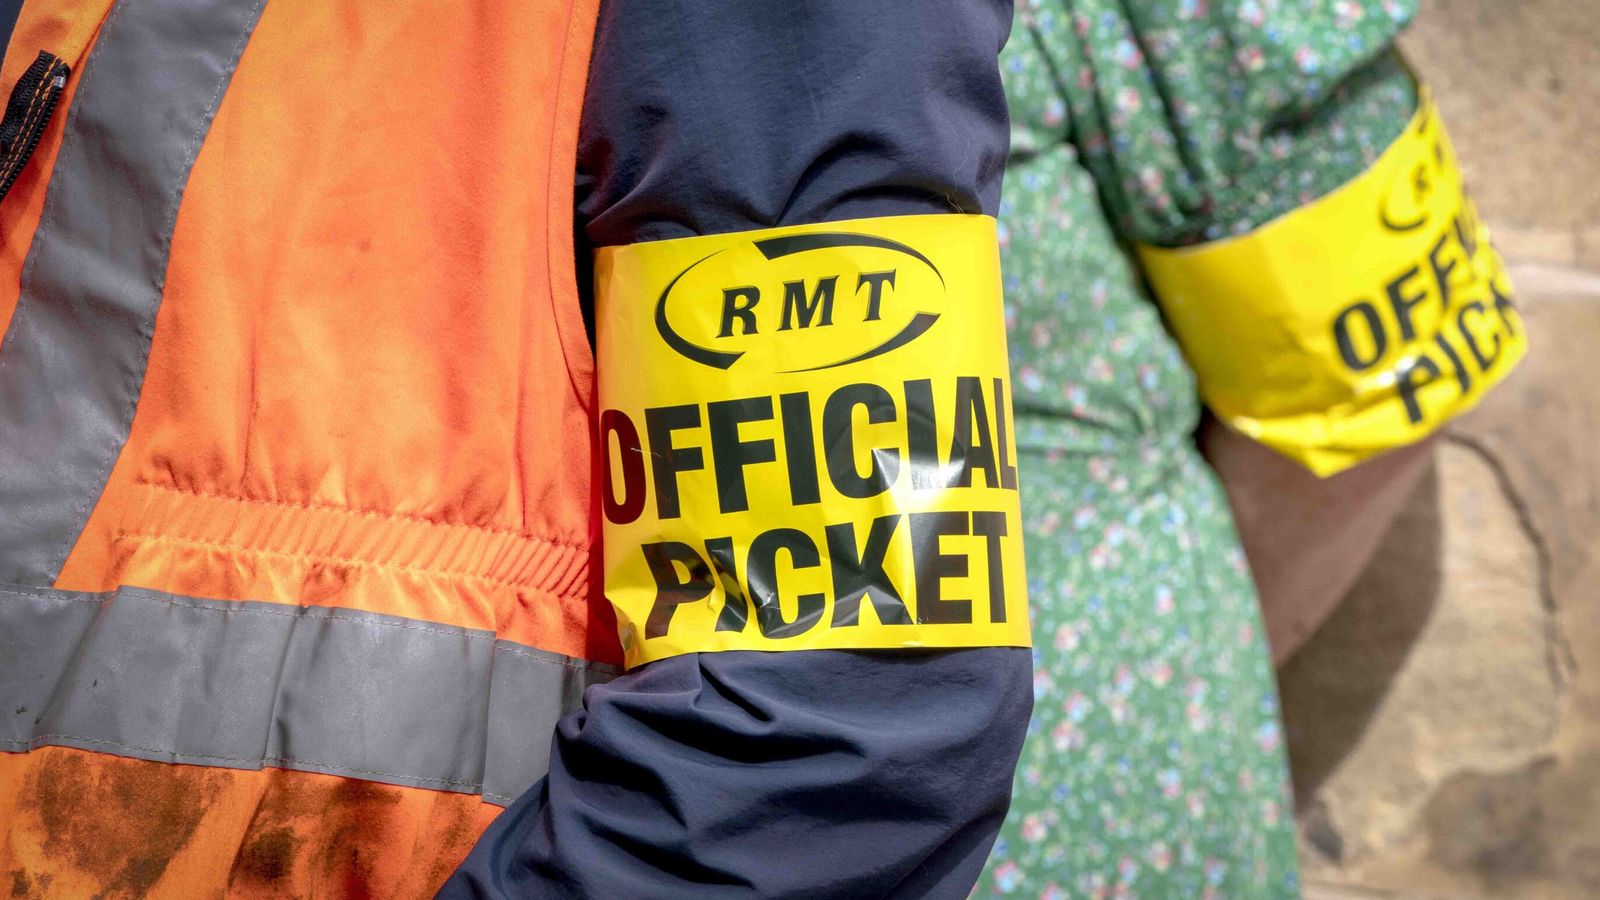 Train services to be disrupted as RMT and Aslef call for strikes